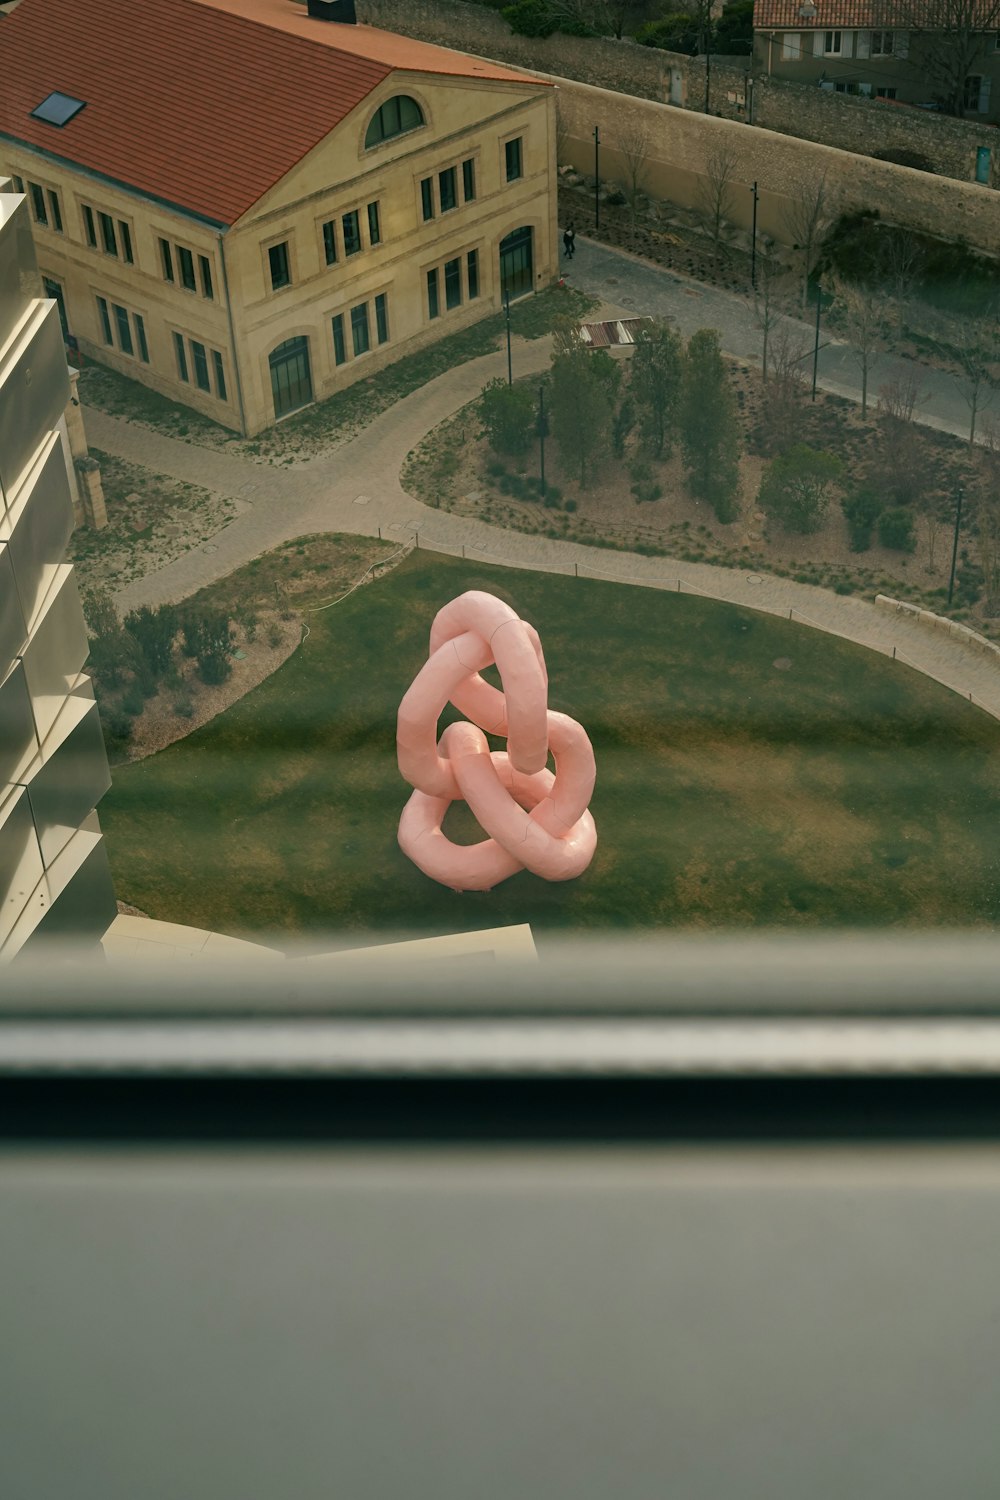 a giant pink inflatable object in front of a building